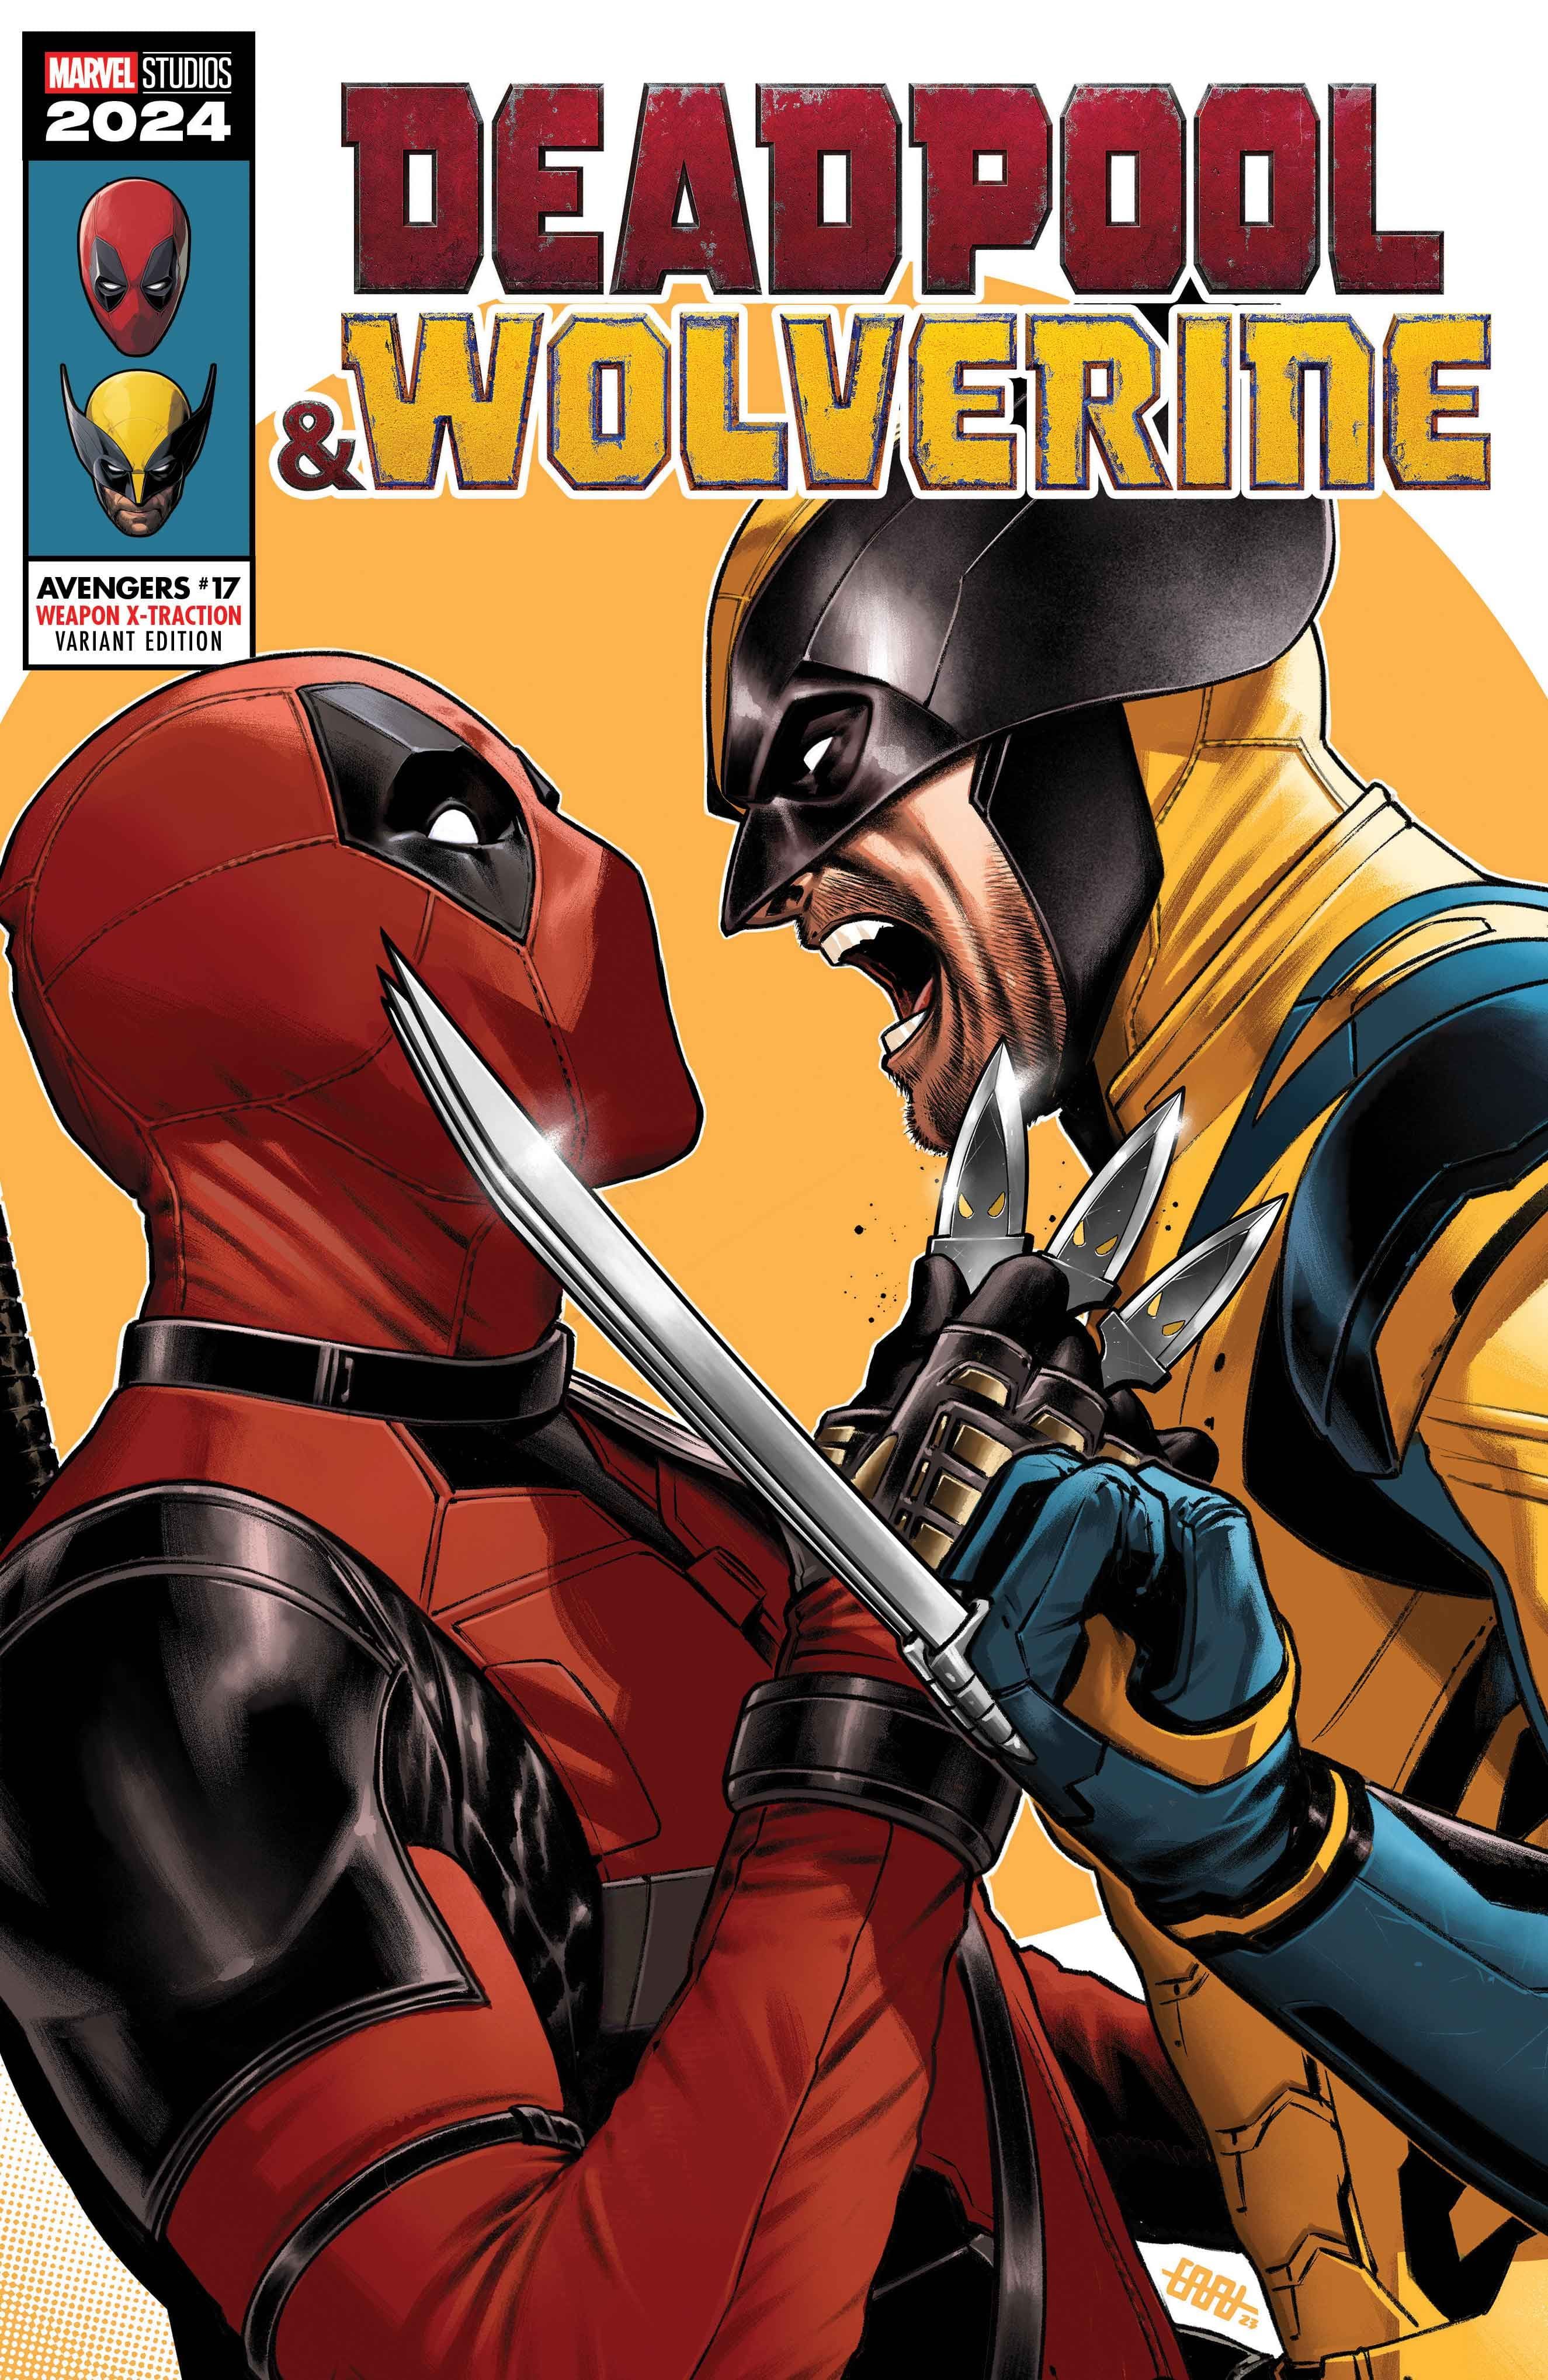 AVENGERS #17 Deadpool & Wolverine Weapon X-Traction Variant Cover by Cafu